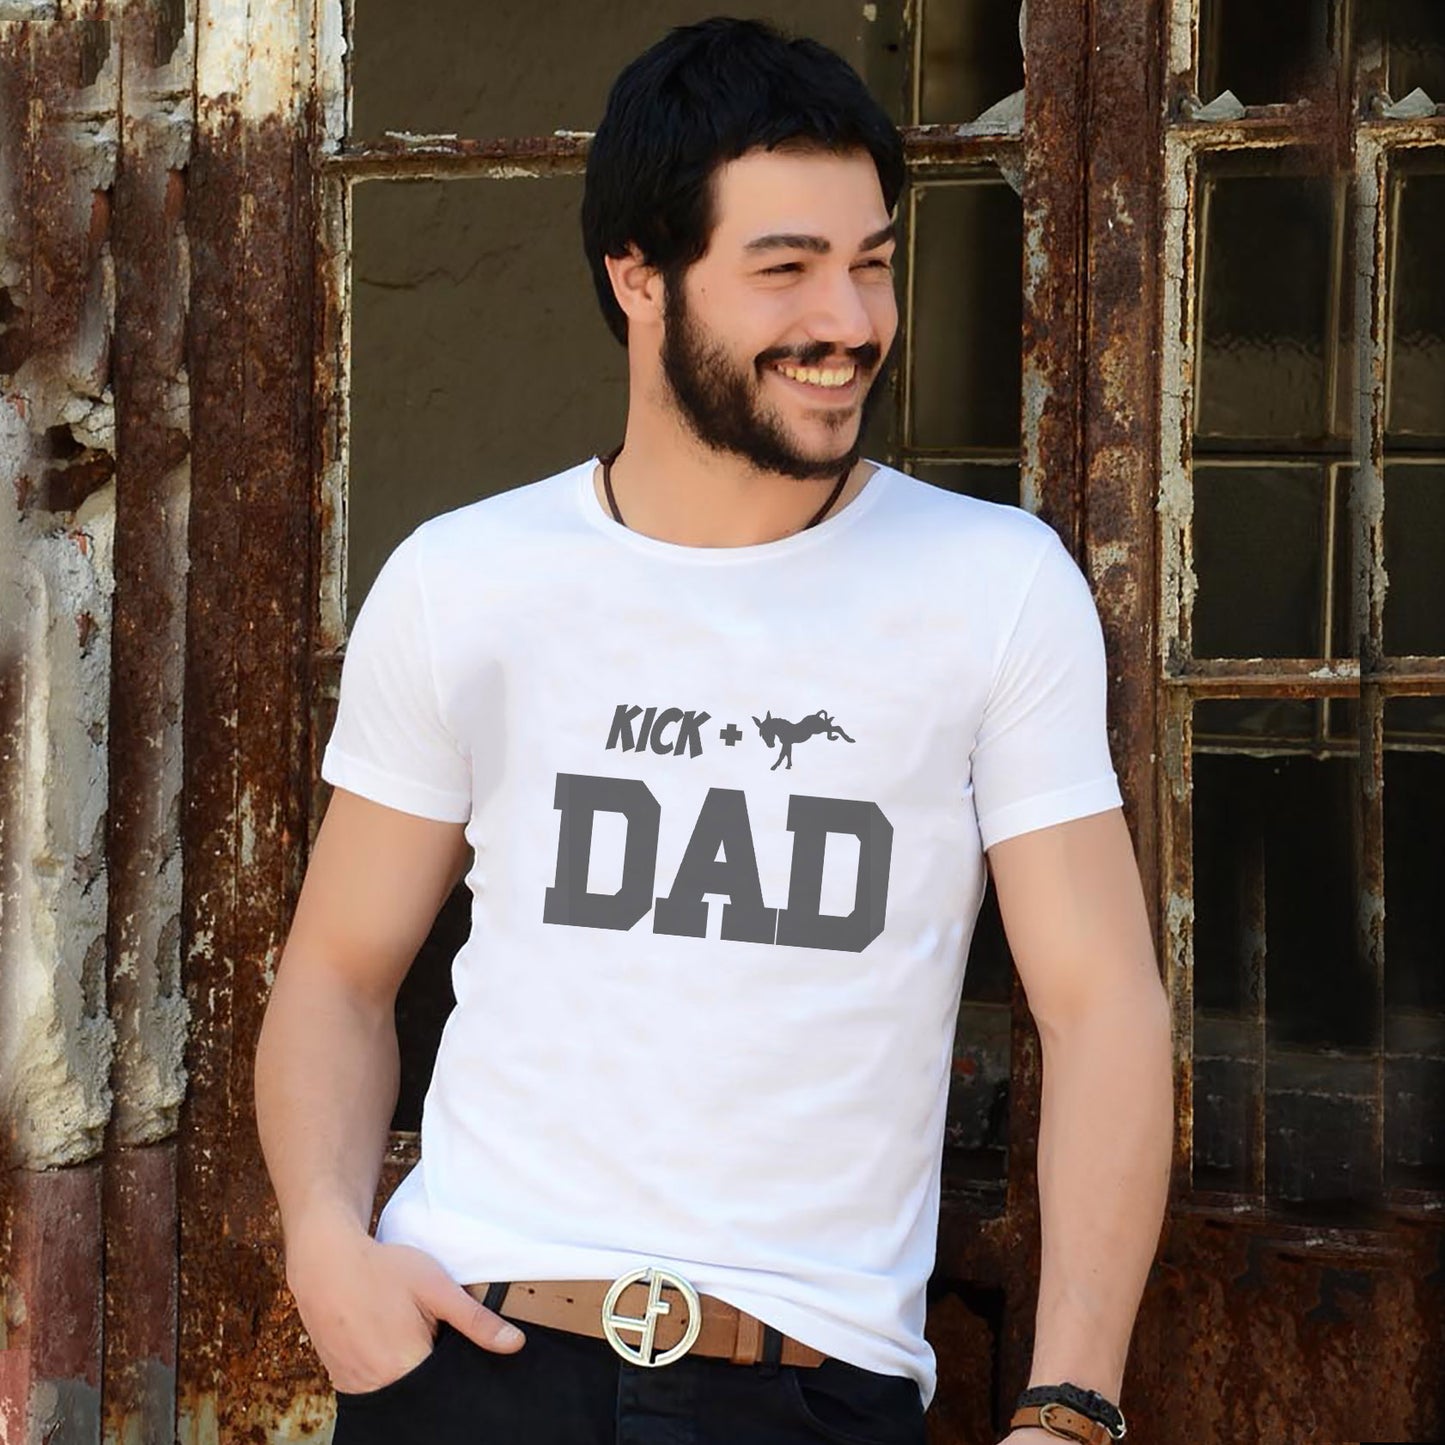 Fathers day Printed Tshirt for Men|Graphic Printed White t shirts for dads|Kickass dad